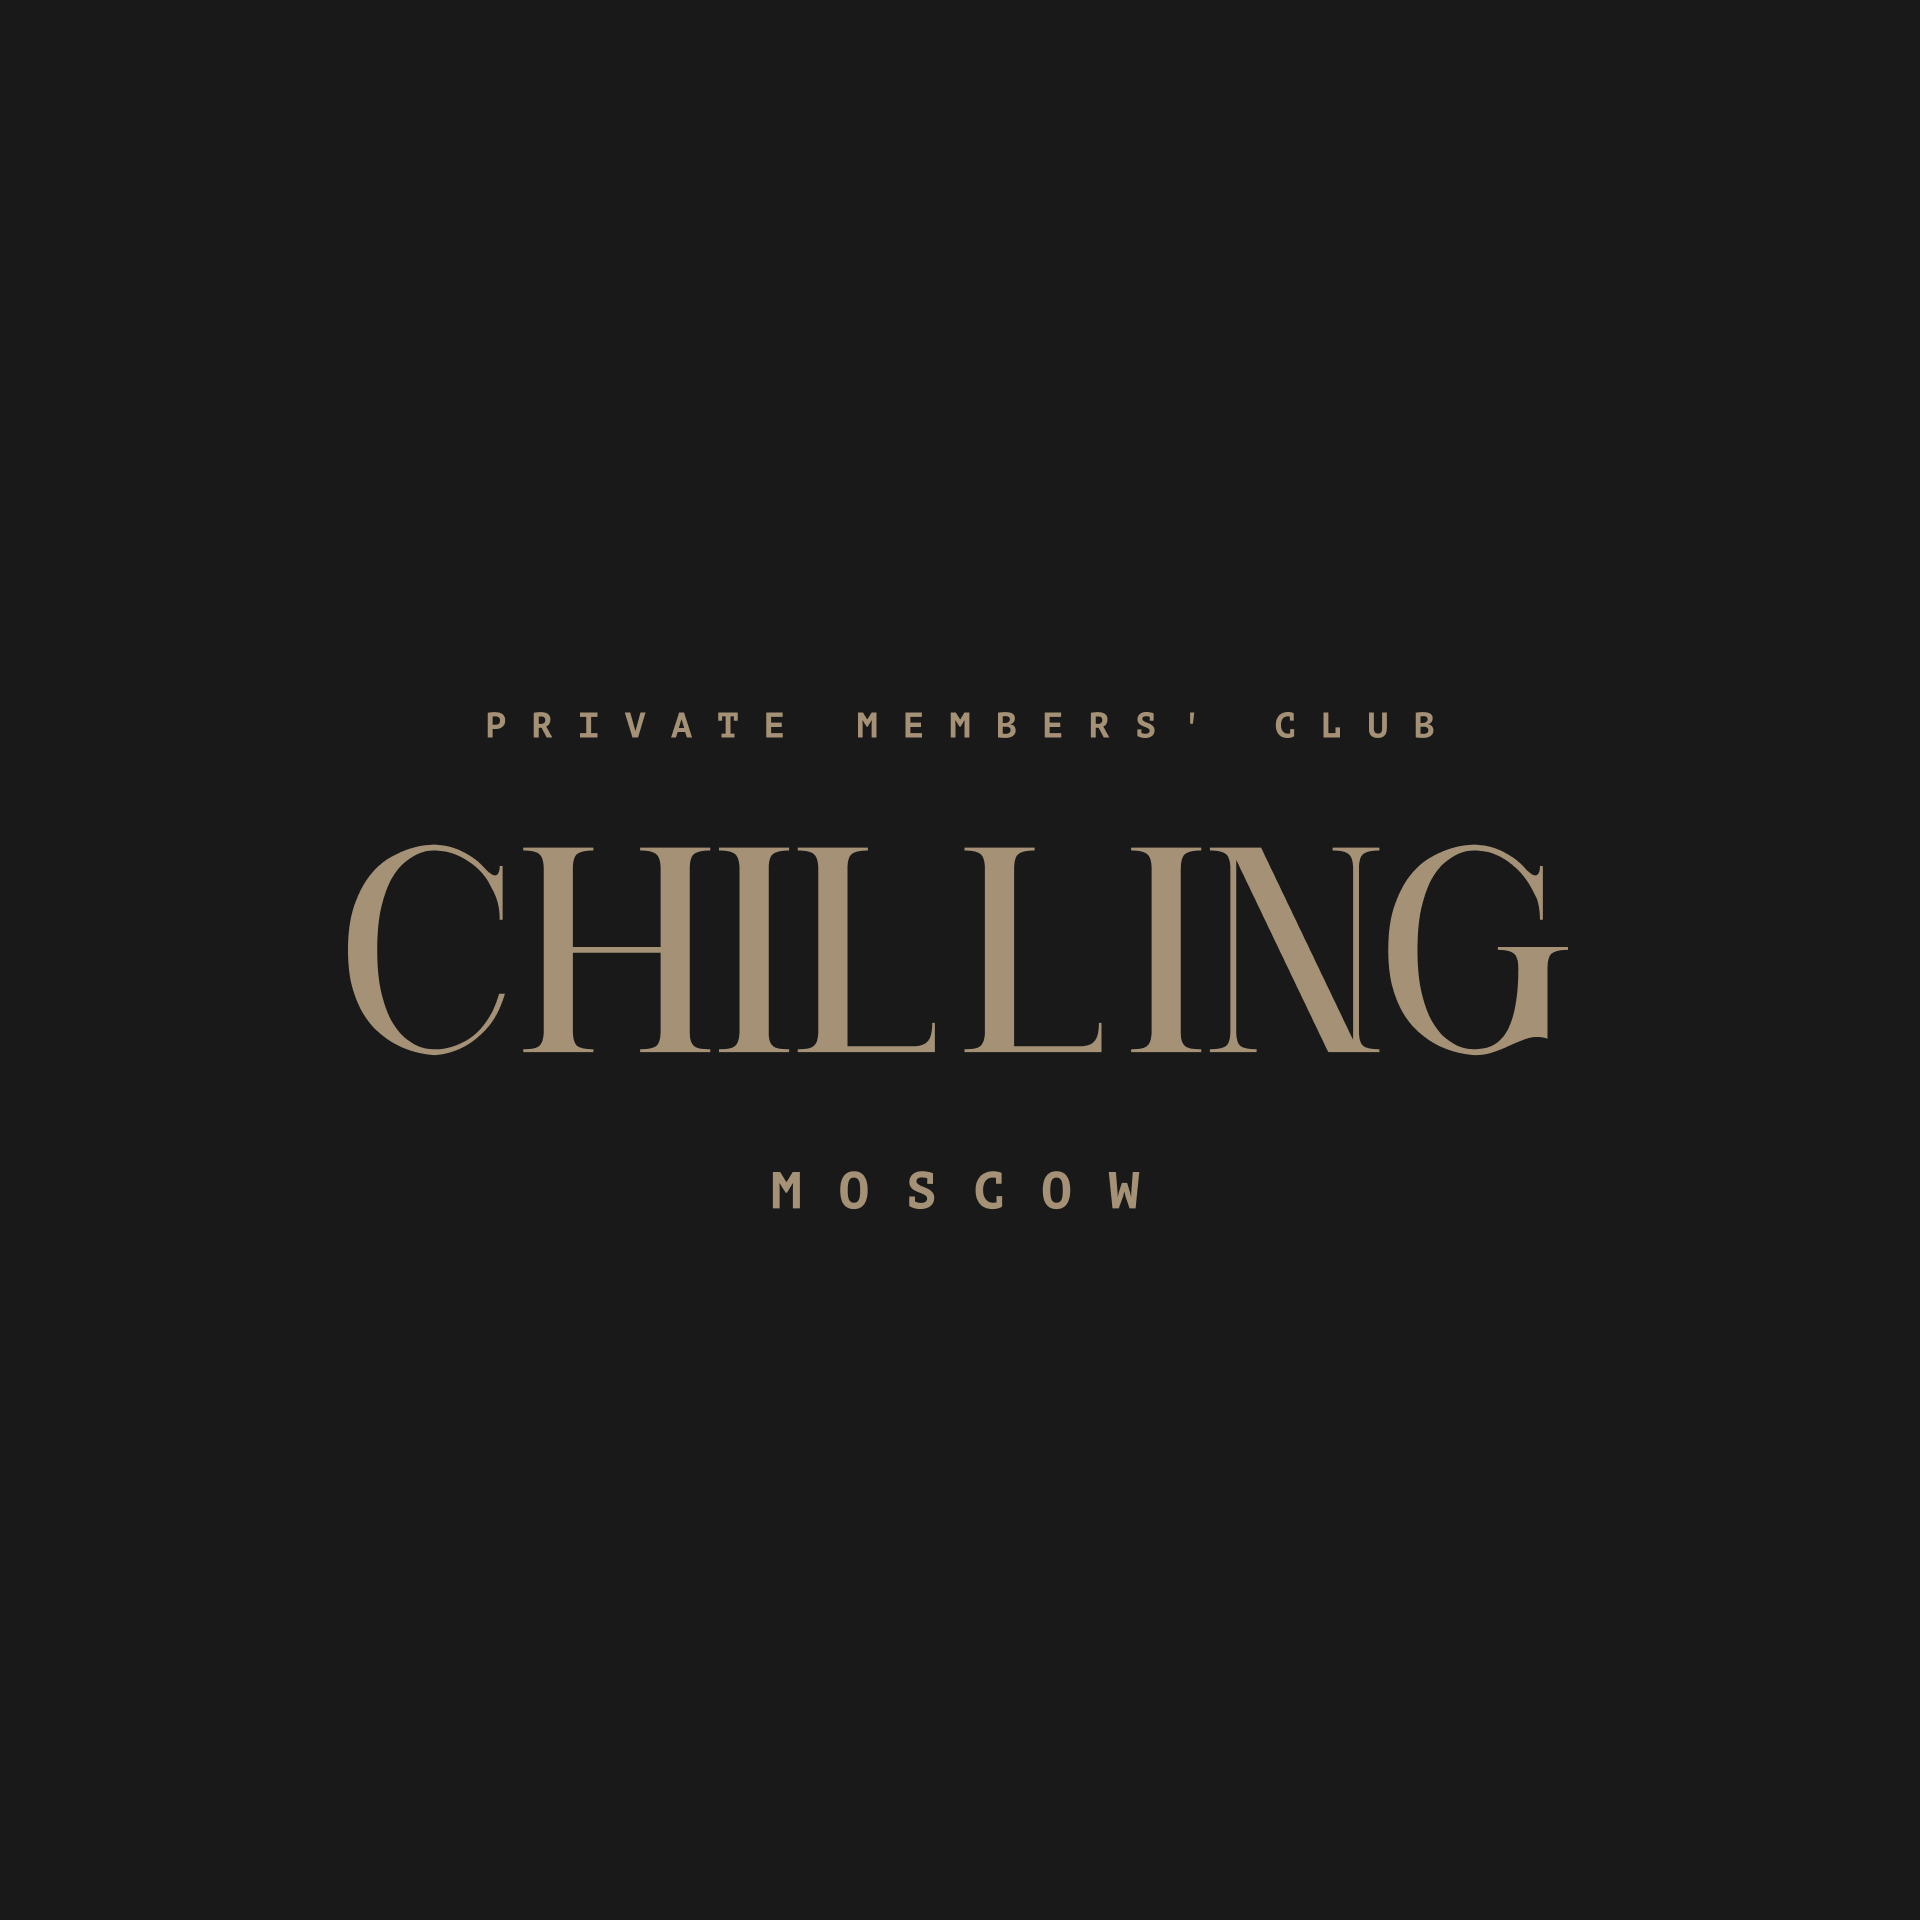 Chilling Moscow. Кальянная чиллинг Красносельская. Chilled in Moscow. Private member